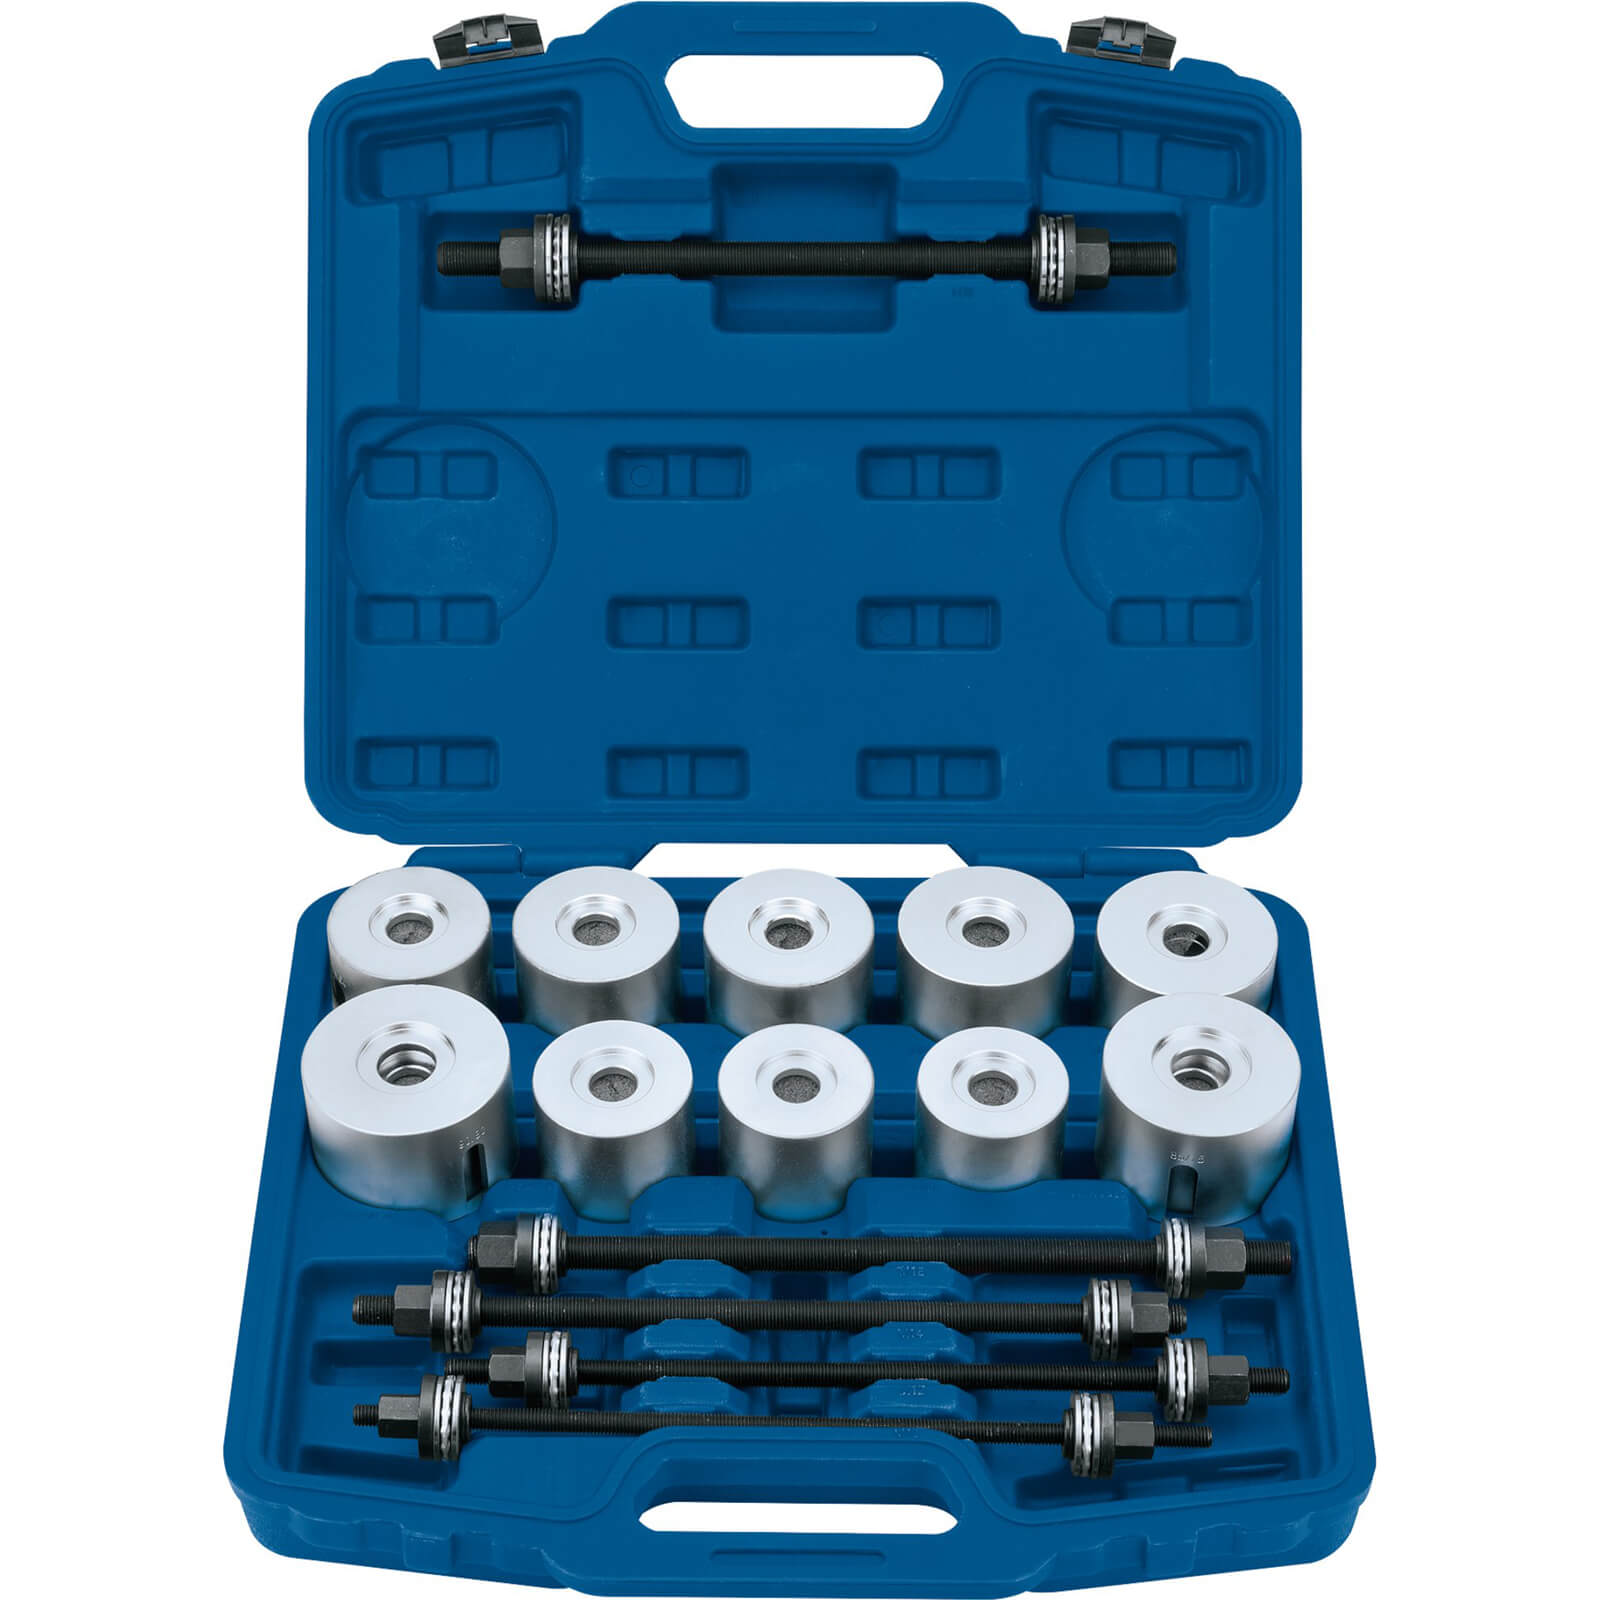 Image of Draper Expert 27 Piece Bearing Seal and Bush Extraction Kit